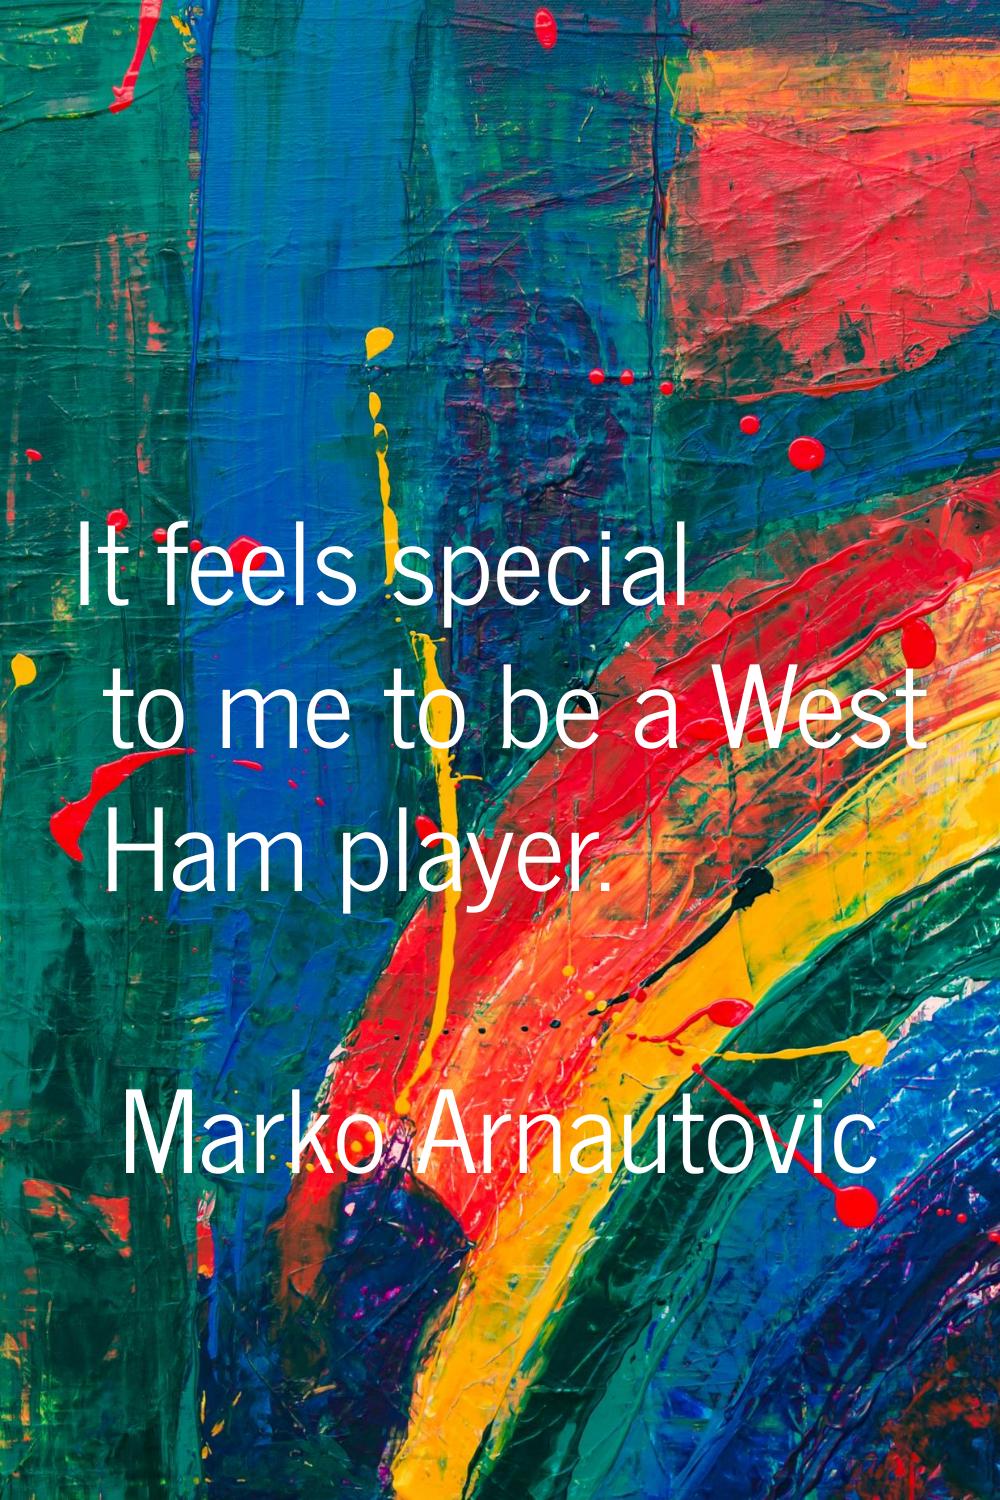 It feels special to me to be a West Ham player.